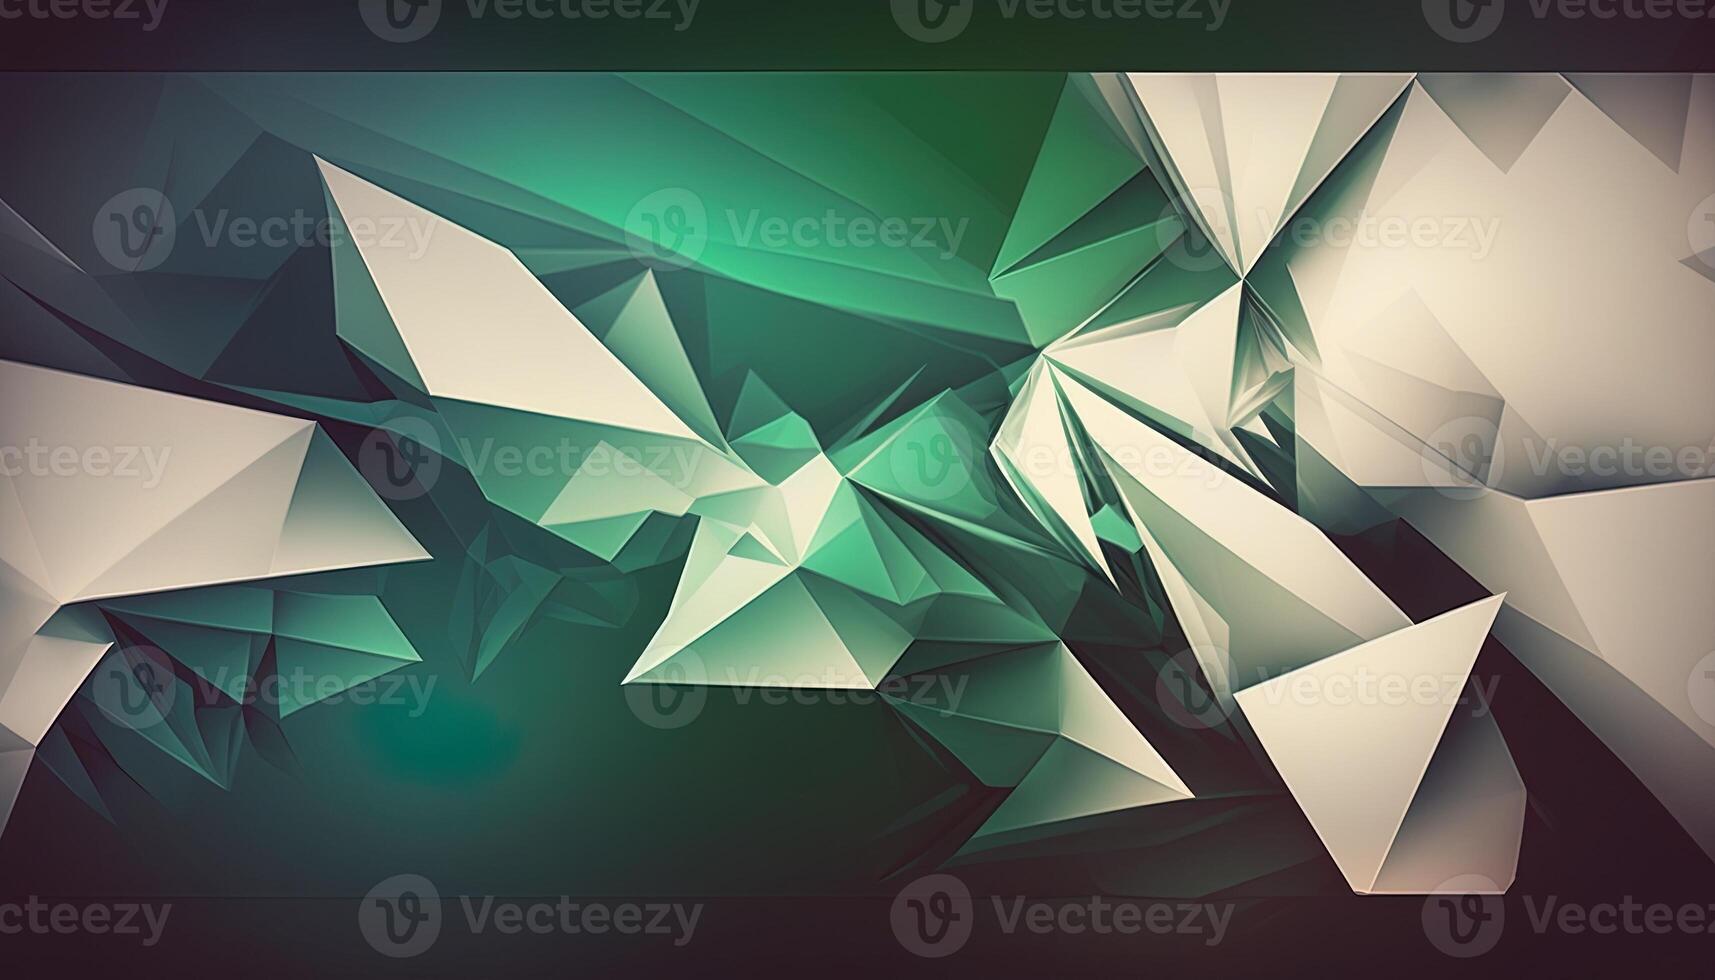 Polygonal high resolution pattern for background, white and teal and green flares. Abstract hexagonal polygonal low poly triangular high resolution futuristic green energetic background photo